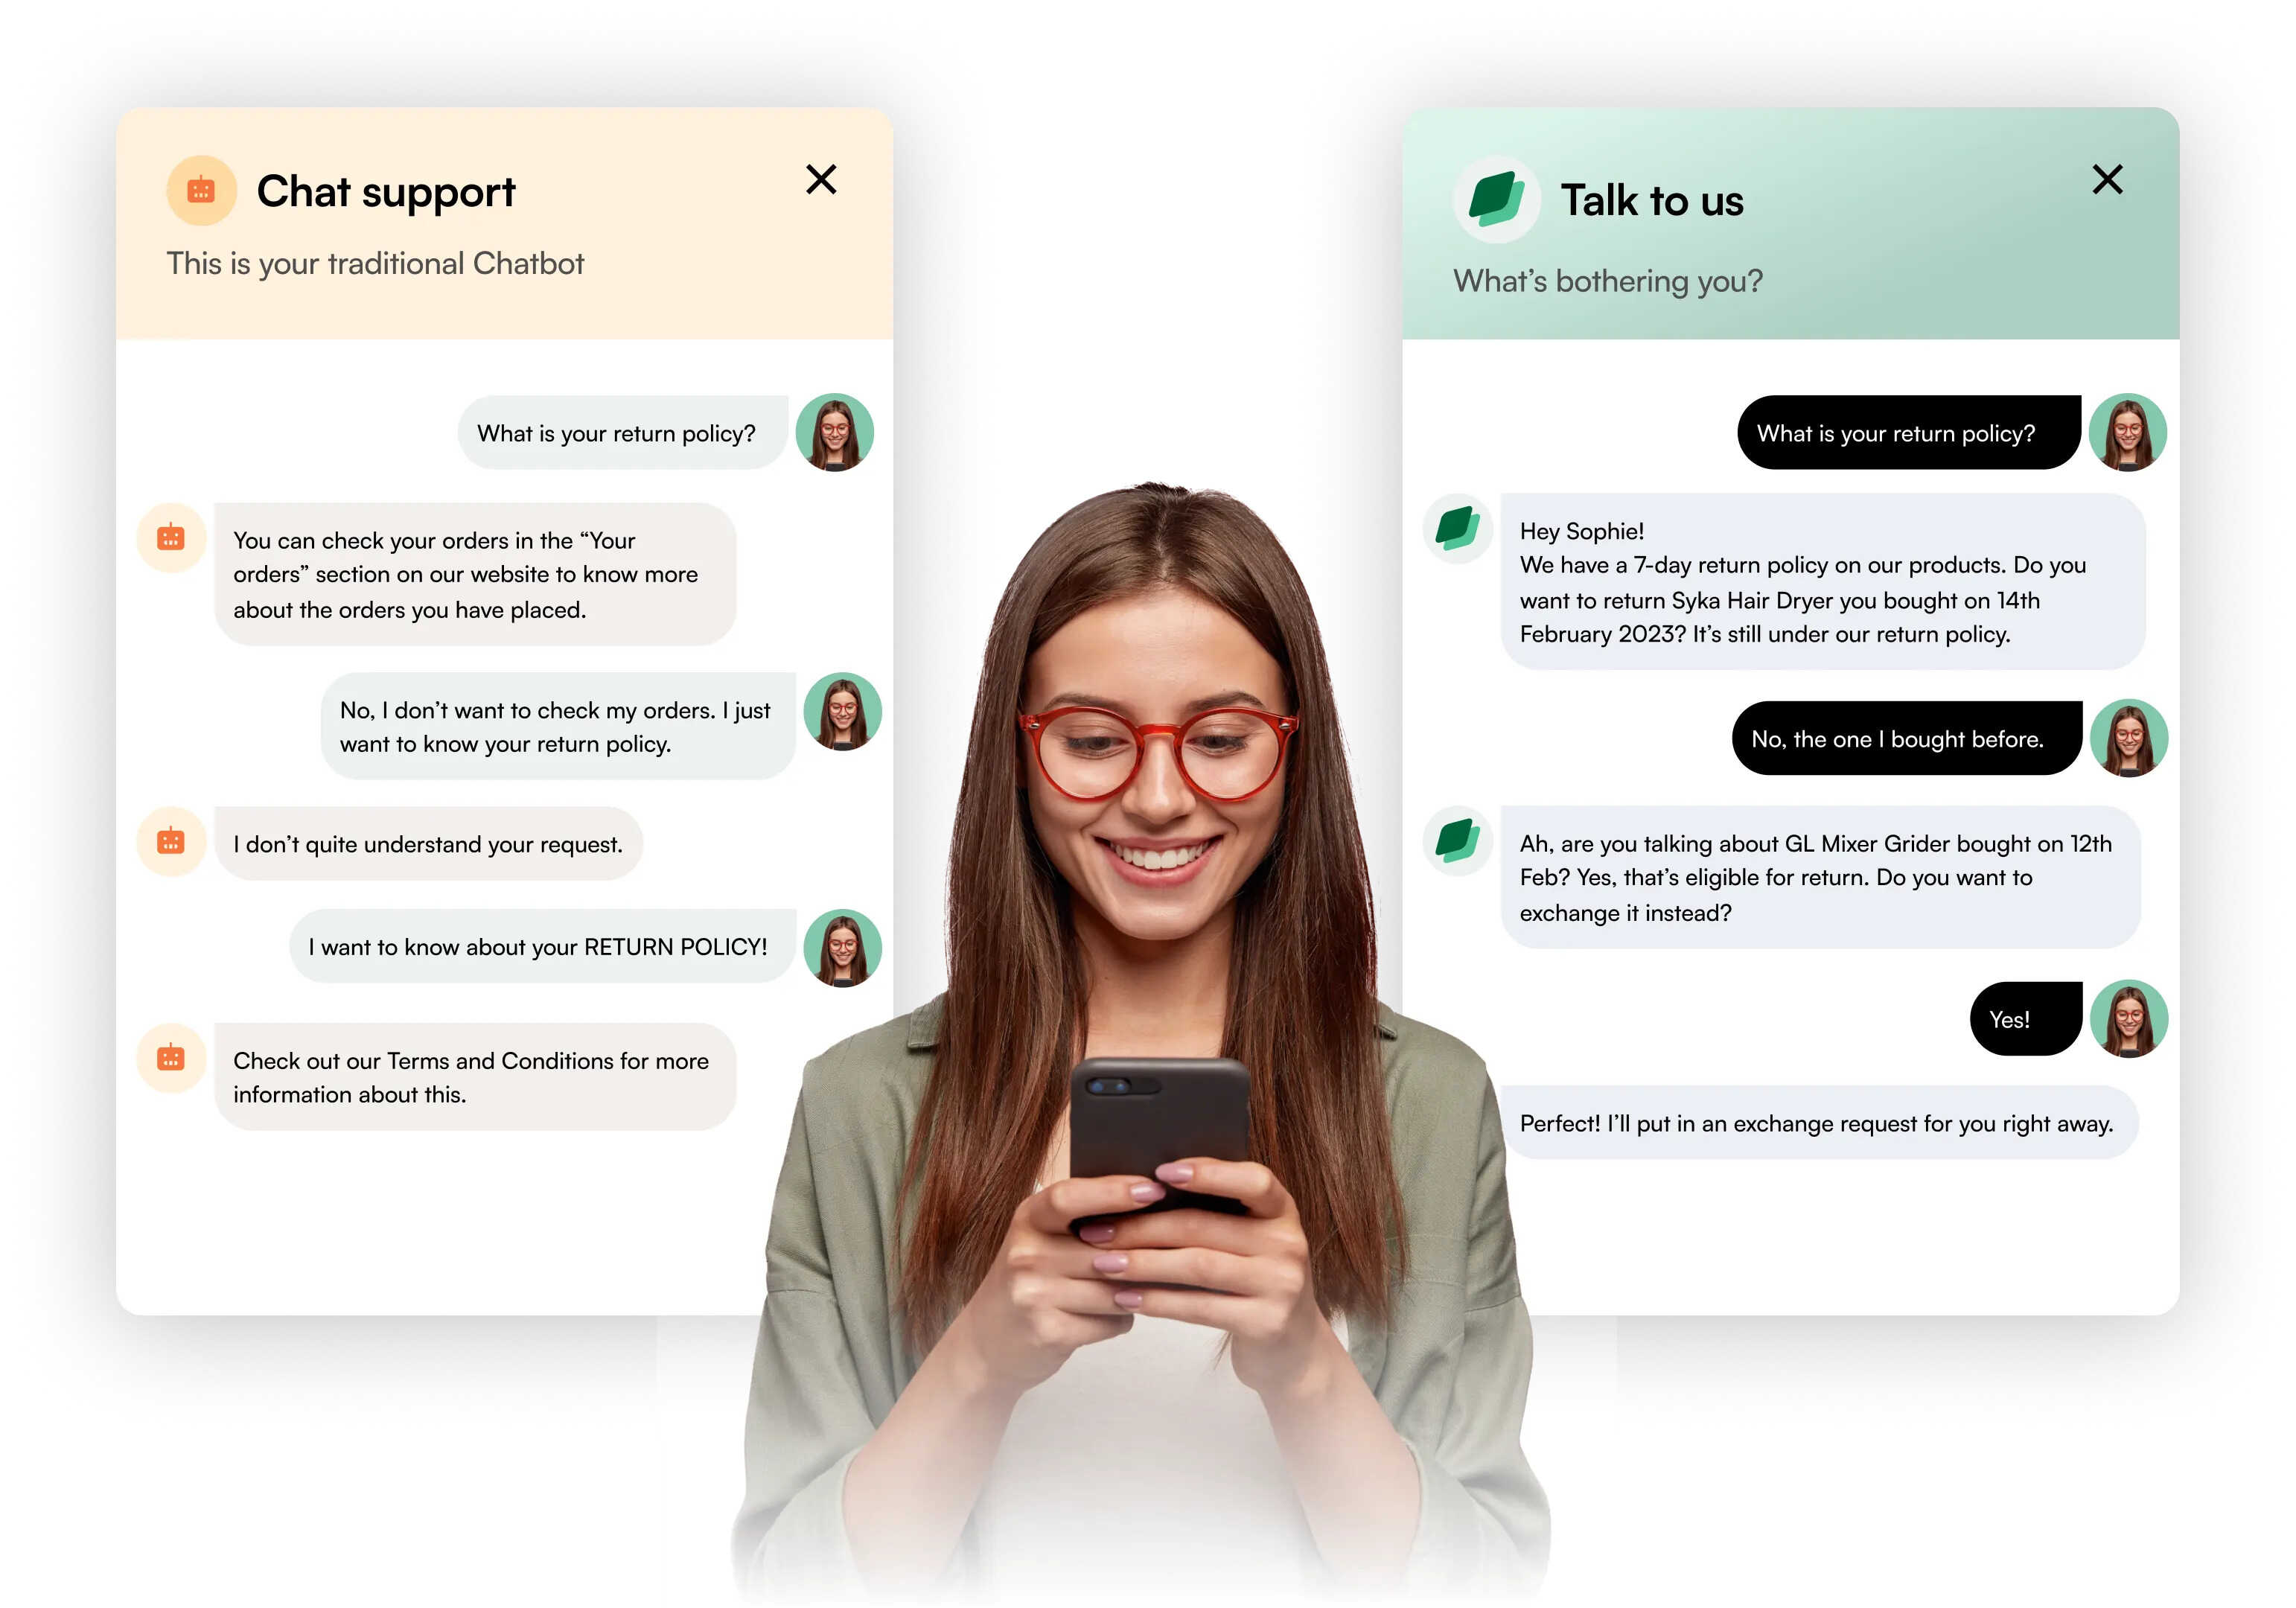 How Many Customers Are Willing To Talk To Chatbots